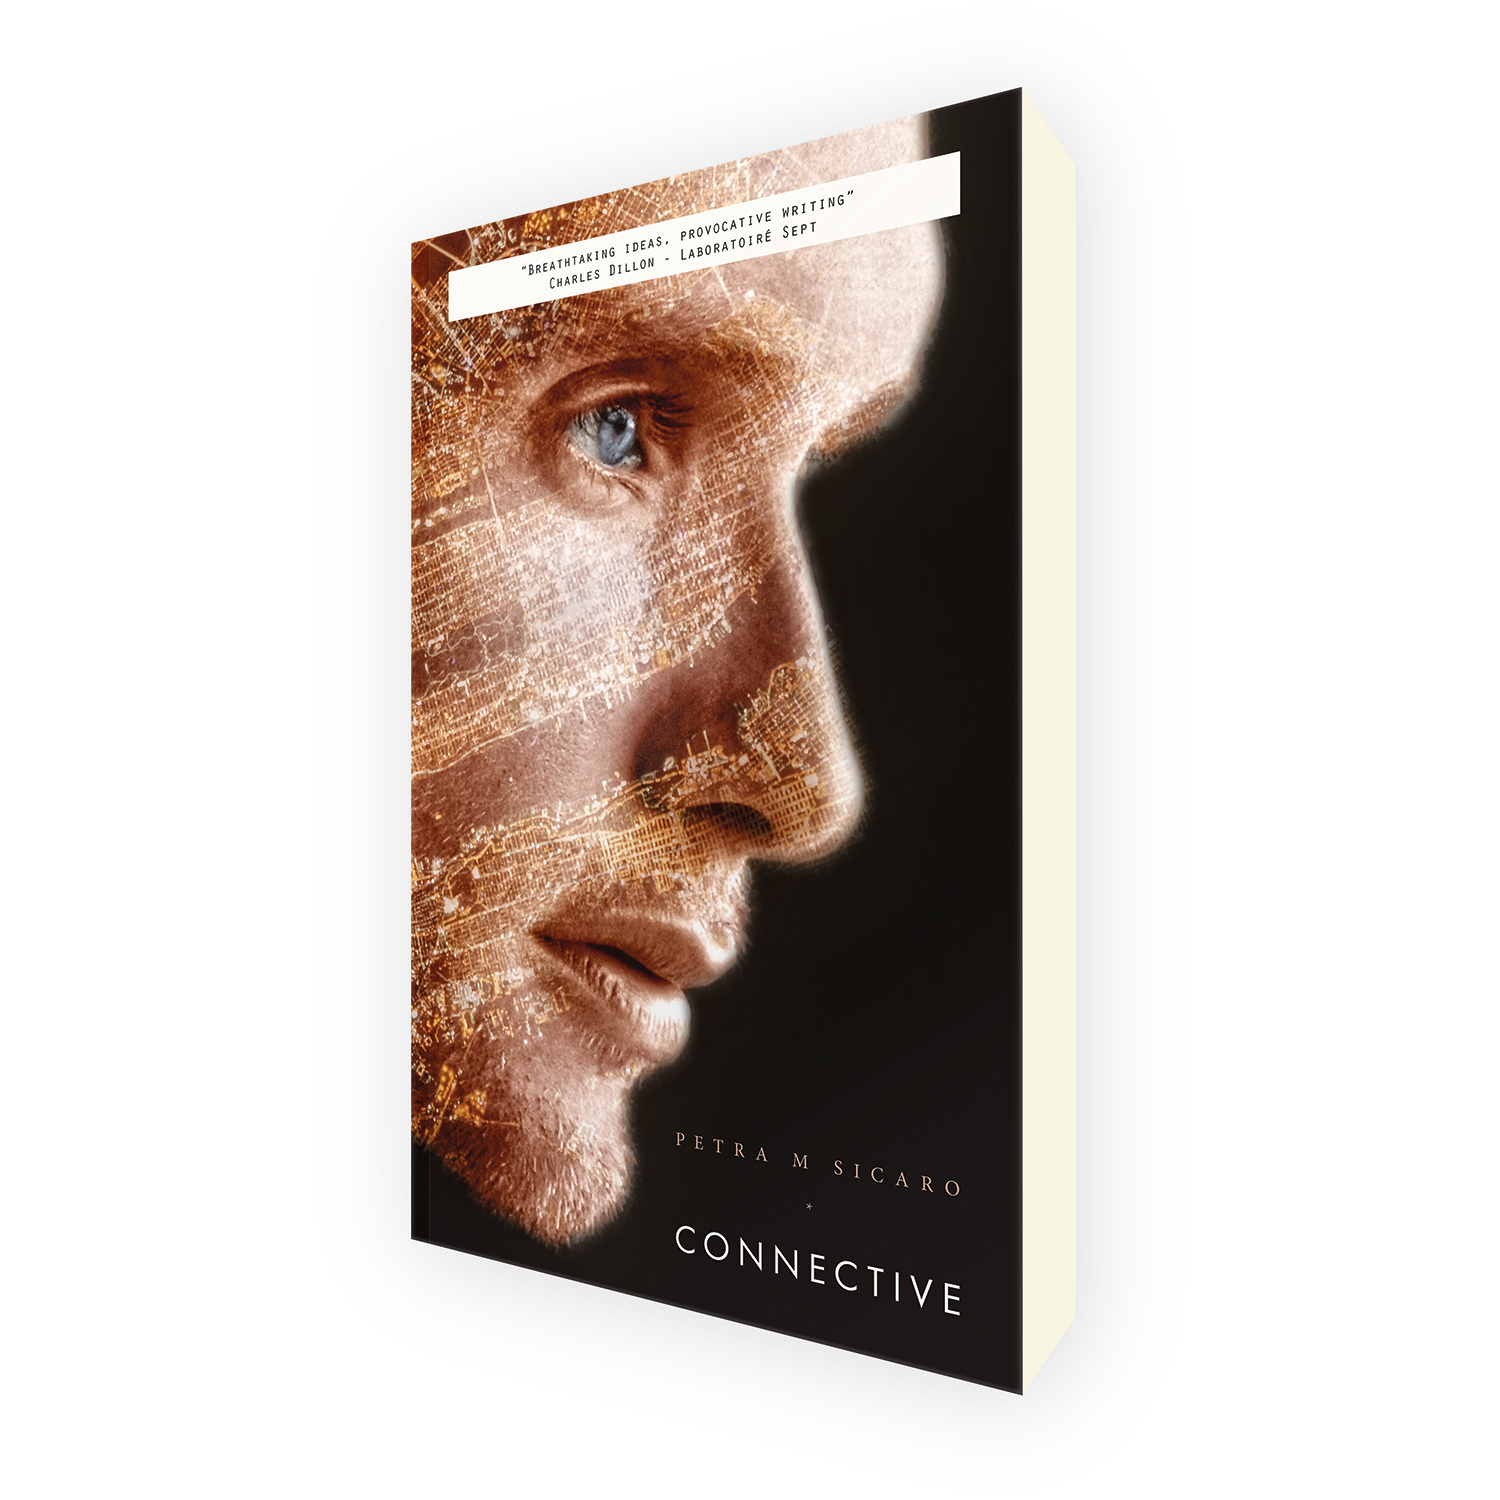 'Connective' is a bespoke cover design for a modern cyber-themed scifi novel. The book cover was designed by Mark Thomas, of coverness.com. To find out more about my book design services, please visit www.coverness.com.